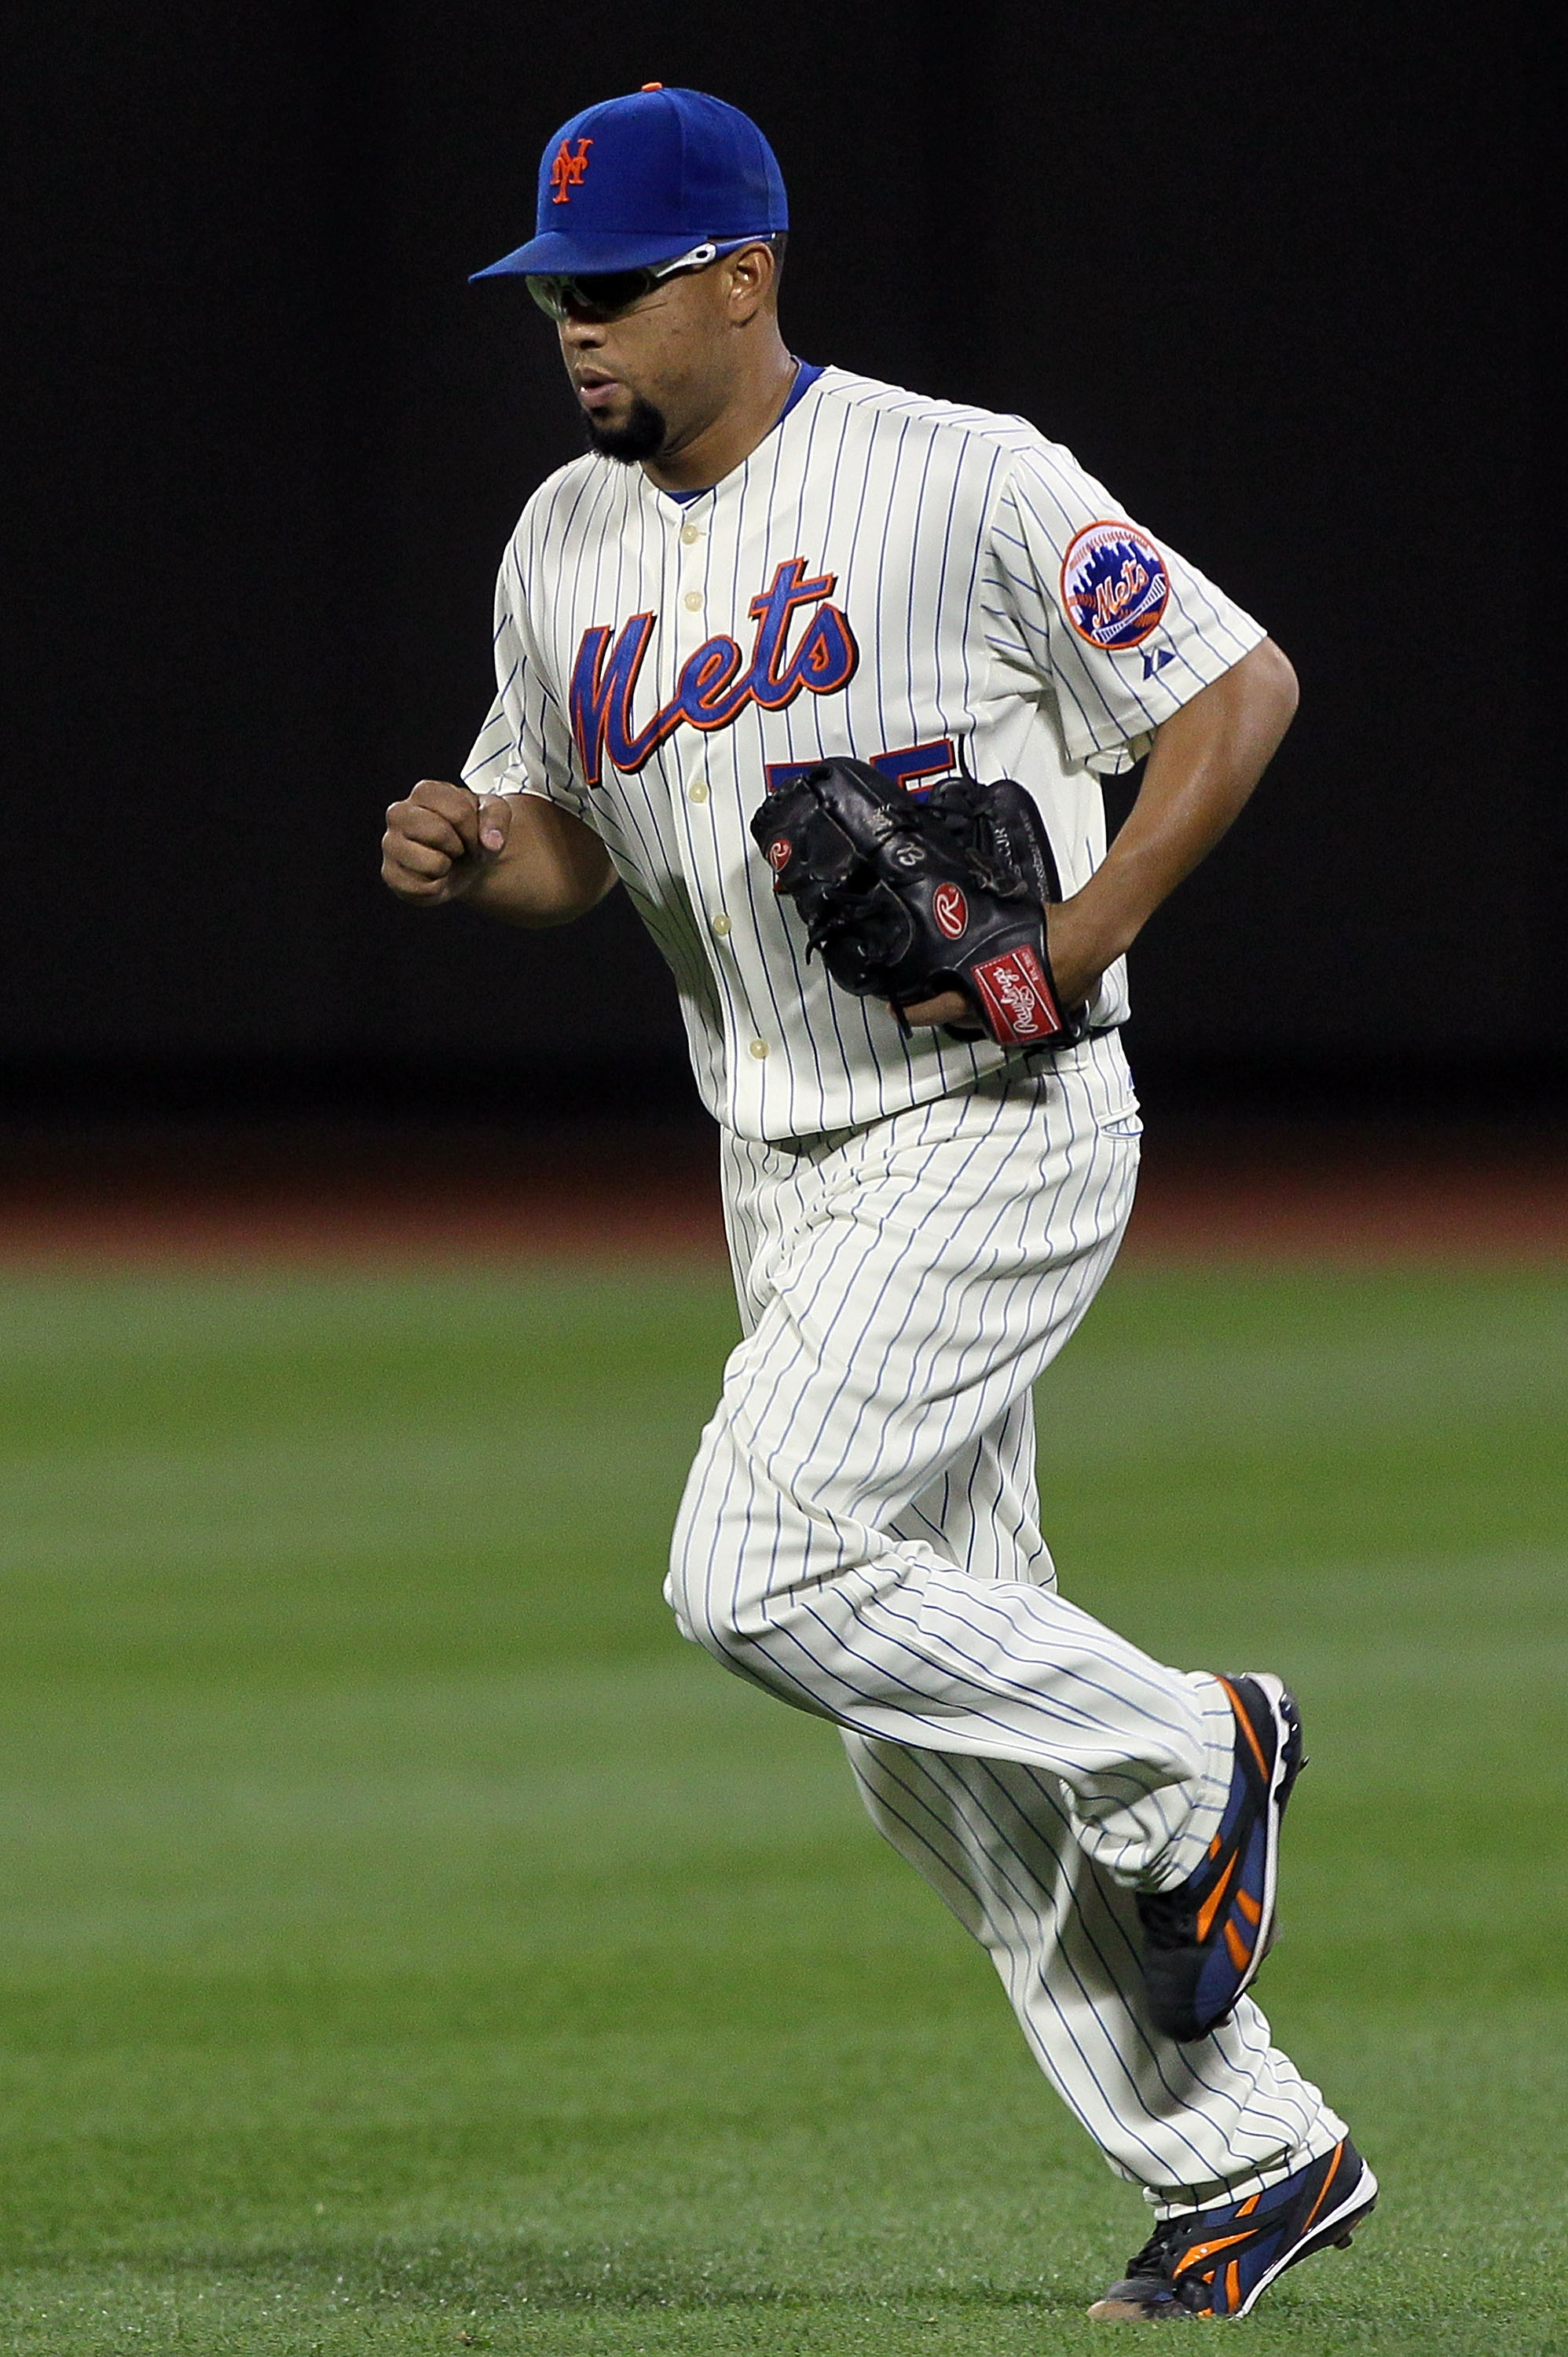 NEW YORK - AUGUST 14:  Francisco Rodriguez #75 of the New York Mets enters the game in the ninth inning against the Philadelphia Phillies on August 14, 2010 at Citi Field in the Flushing neighborhood of the Queens borough of New York City. The Phillies de